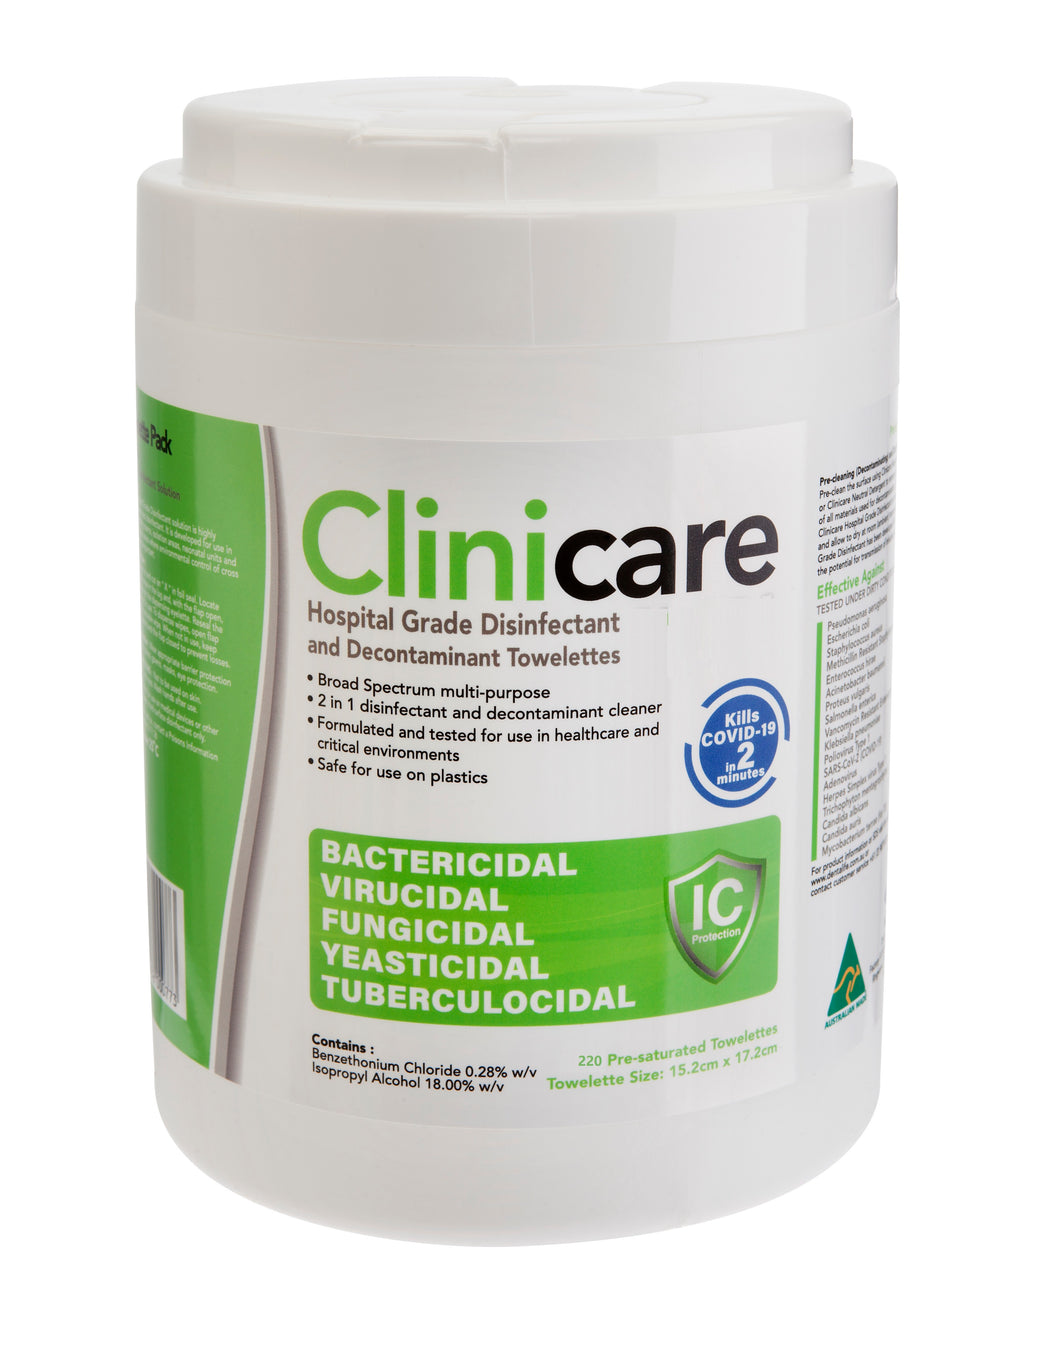 Clinicare Hospital Grade Disinfectant and Decontaminant Towelettes Wipe 220 Sheets